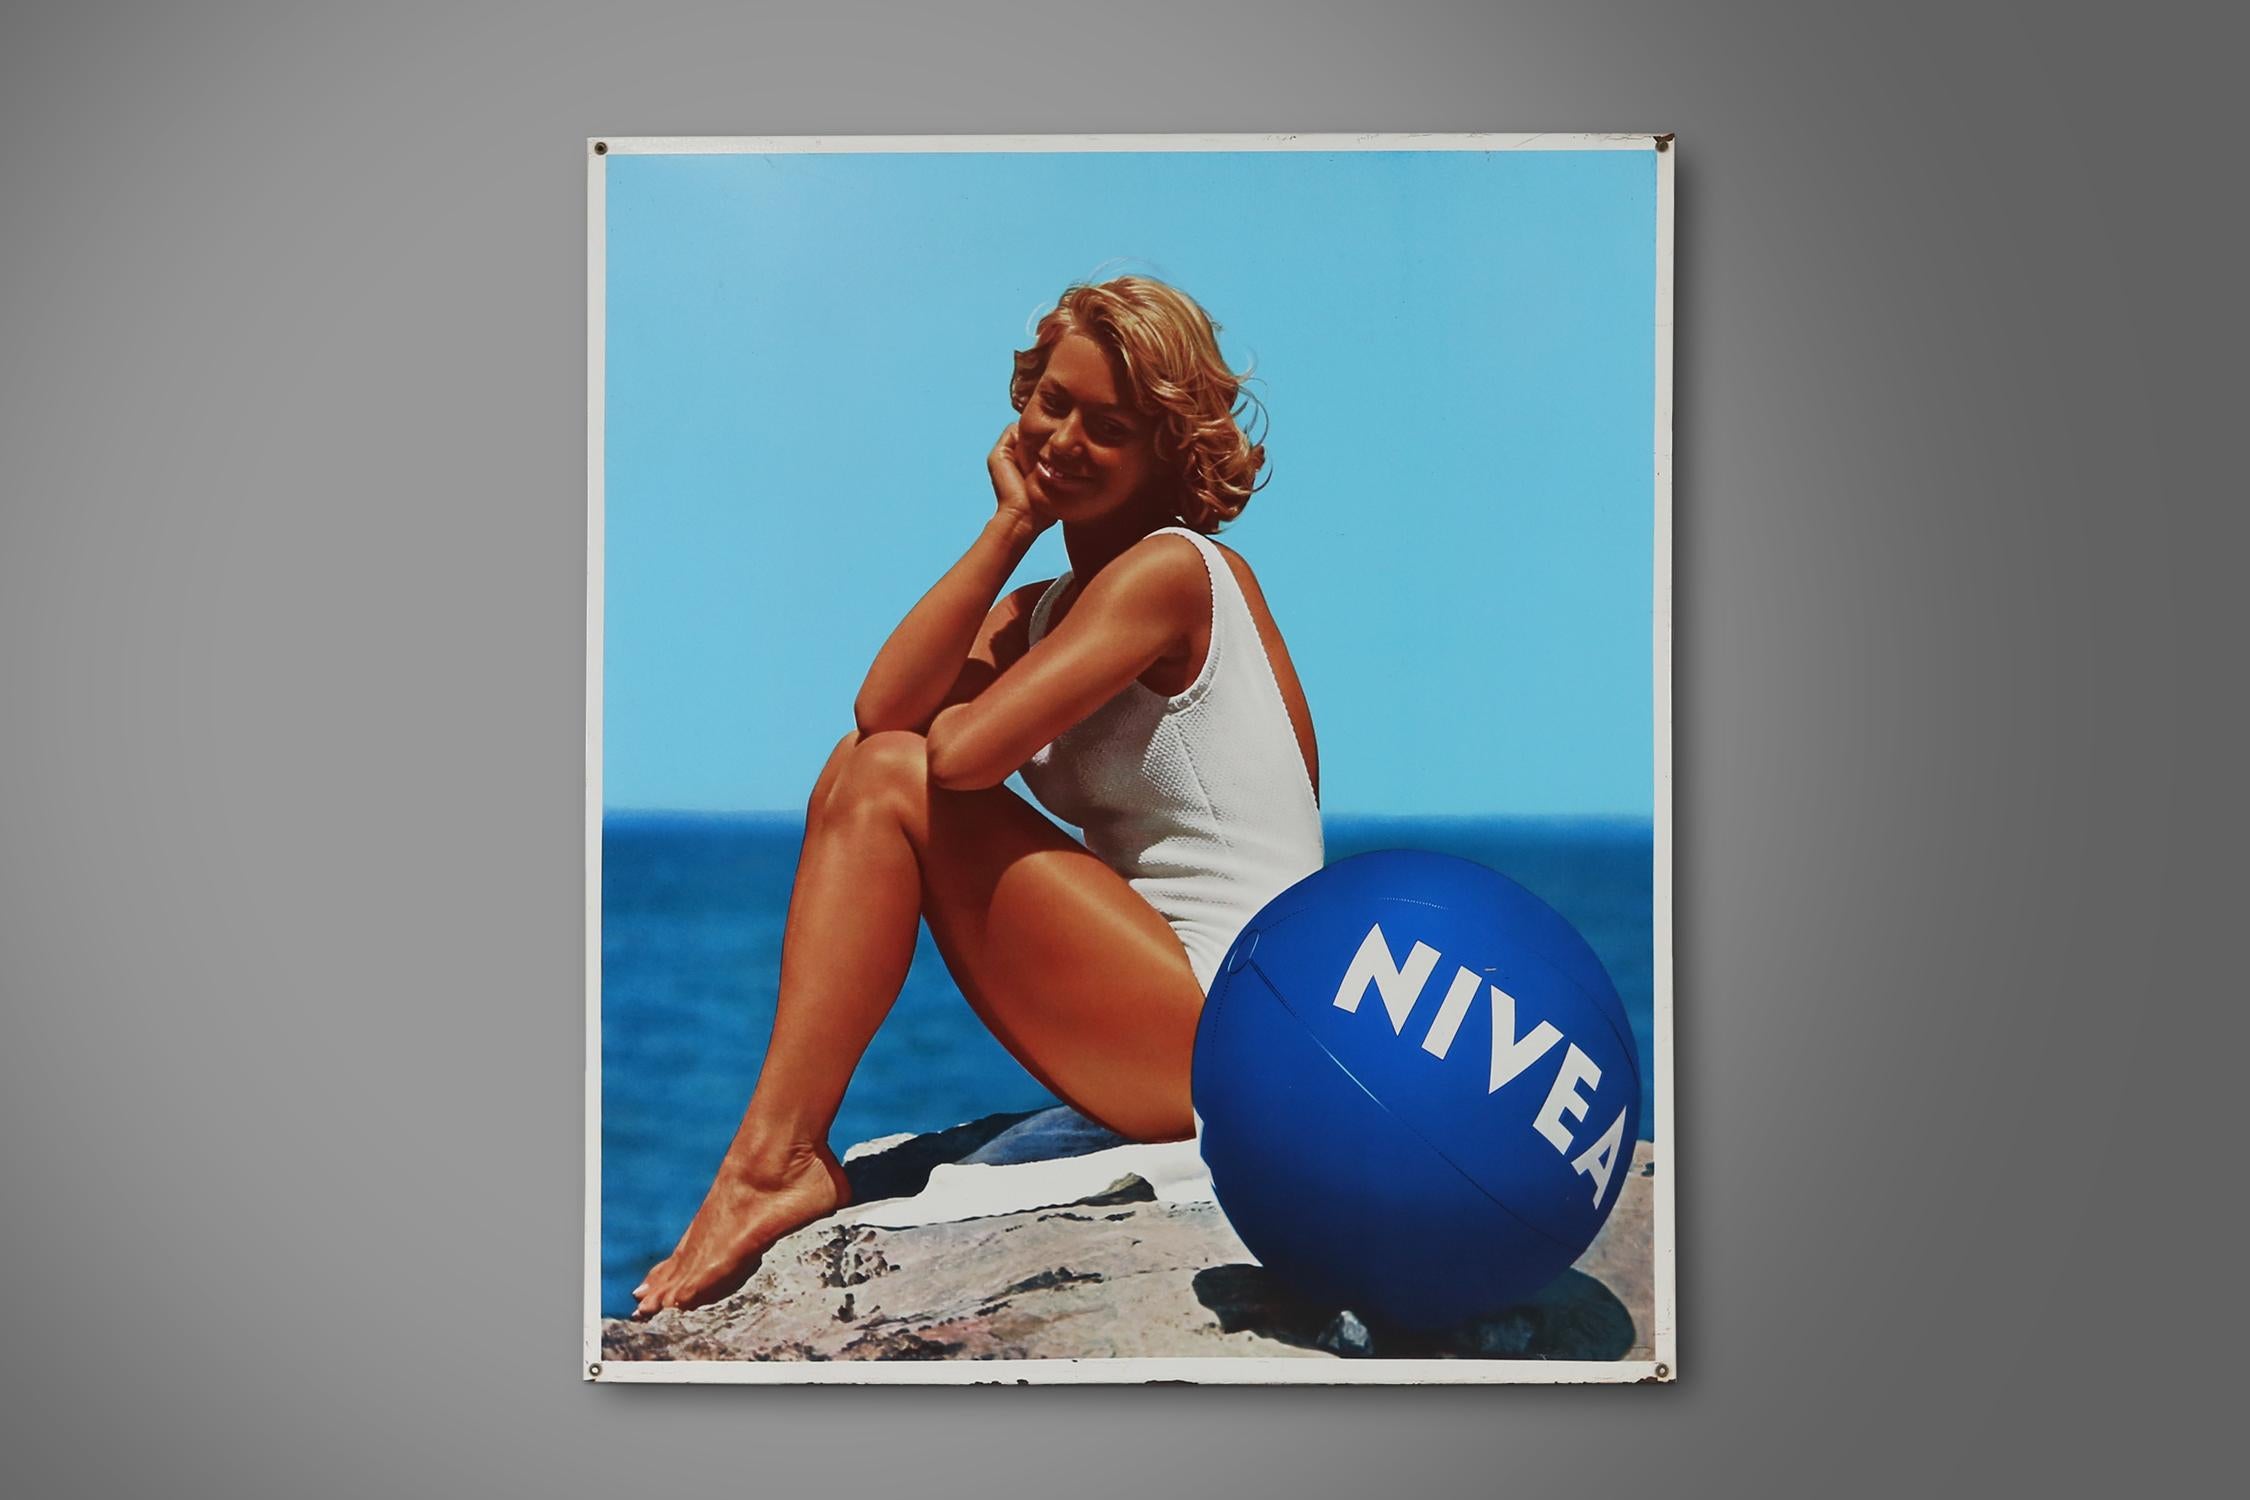 Belgium / 1970s / Nivea / advertising sign / mid-century / vintage / design

This rare to find large Belgian advertisement shows a woman on the beach, in front of her the famous blue Nivea beach ball. This stunning advertisement in attractive bright